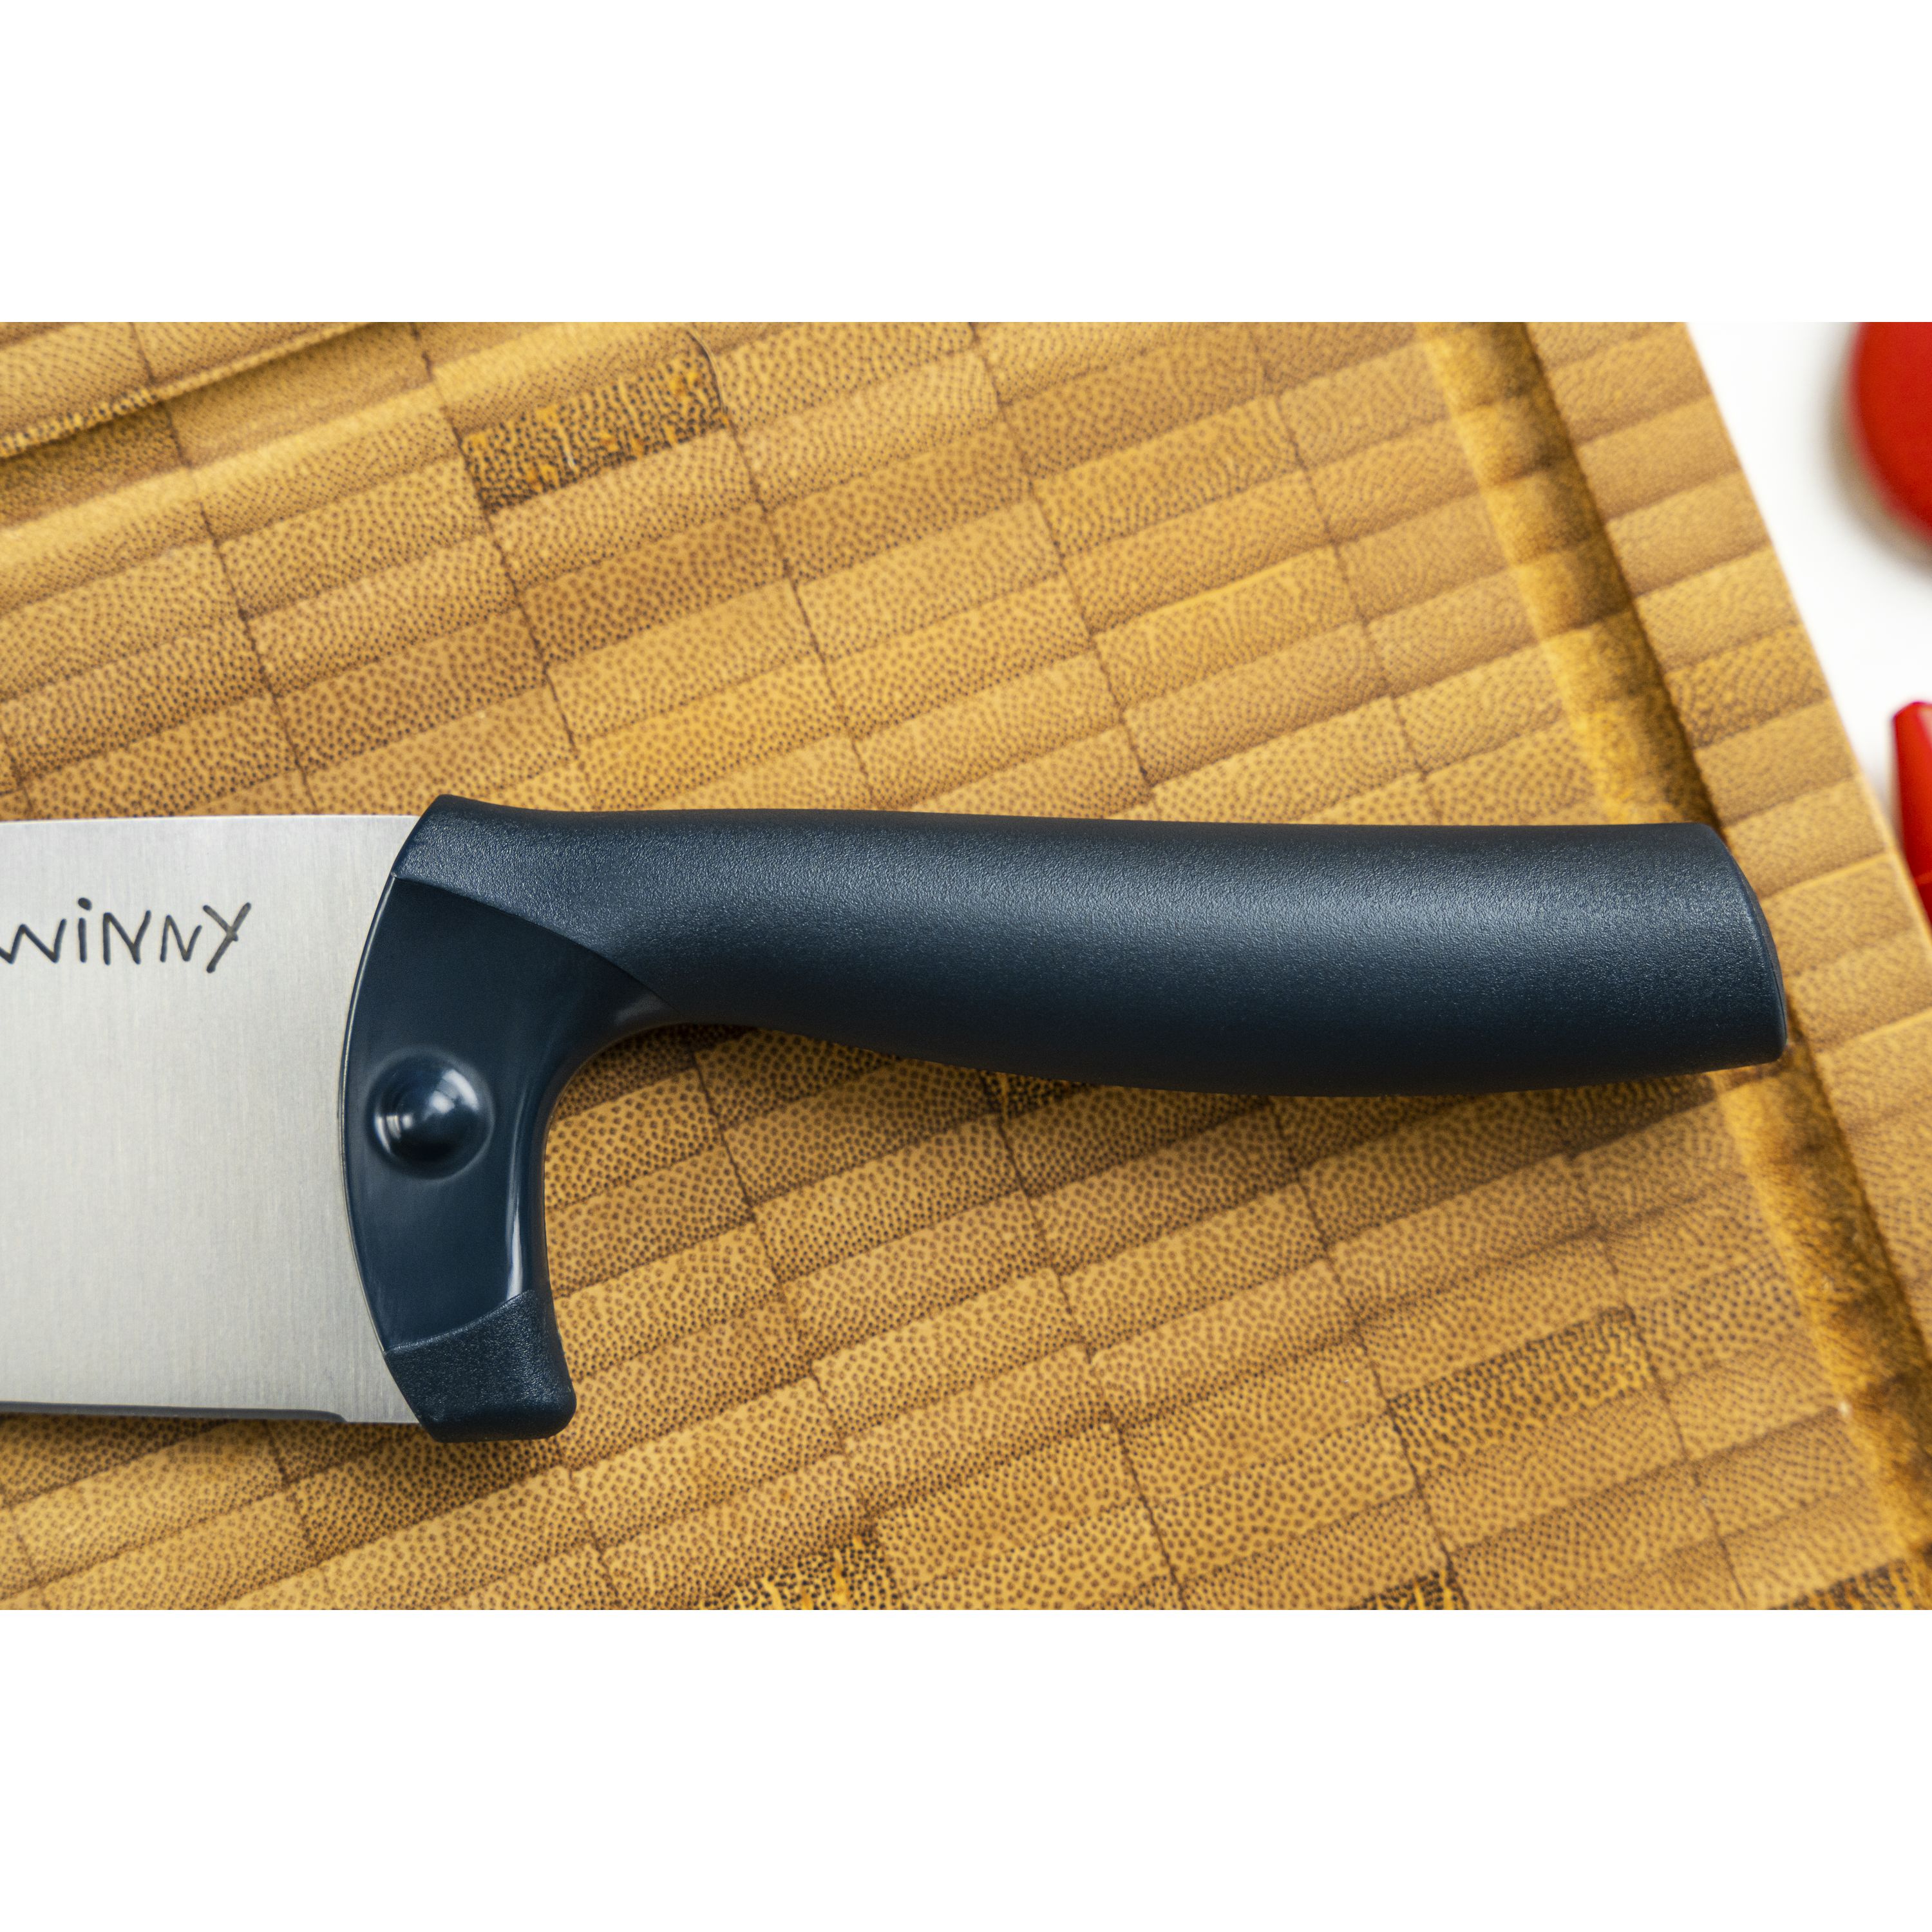 Zwilling Twinny Red Kid's Chef Knife with Sheath - Fante's Kitchen